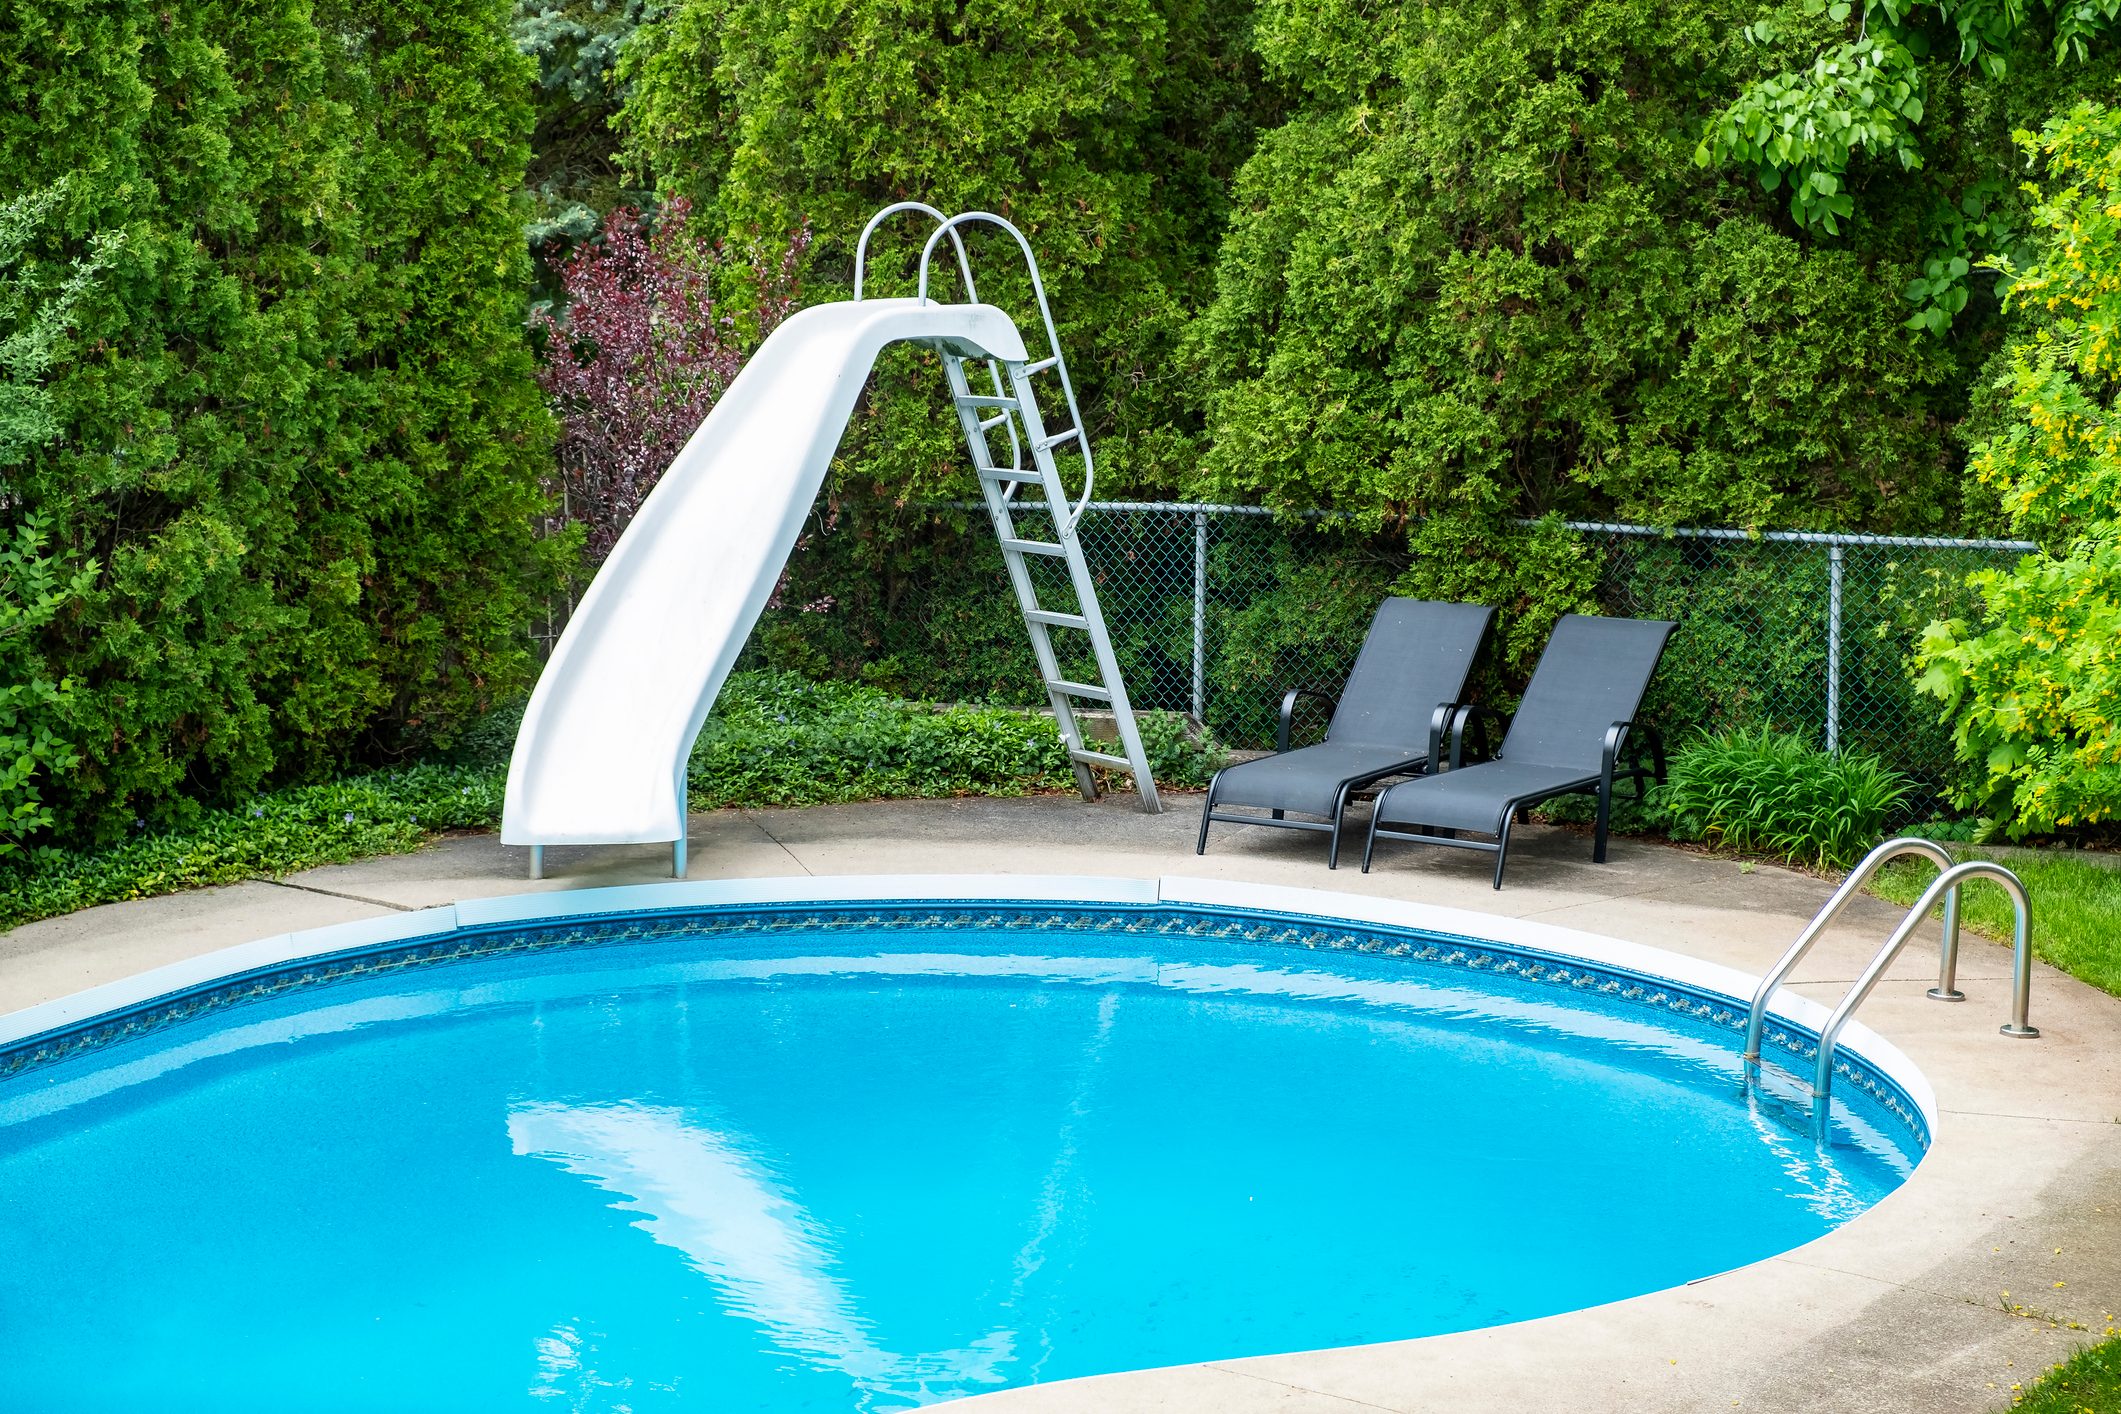 6 Ways To Use Baking Soda To Clean Your Pool